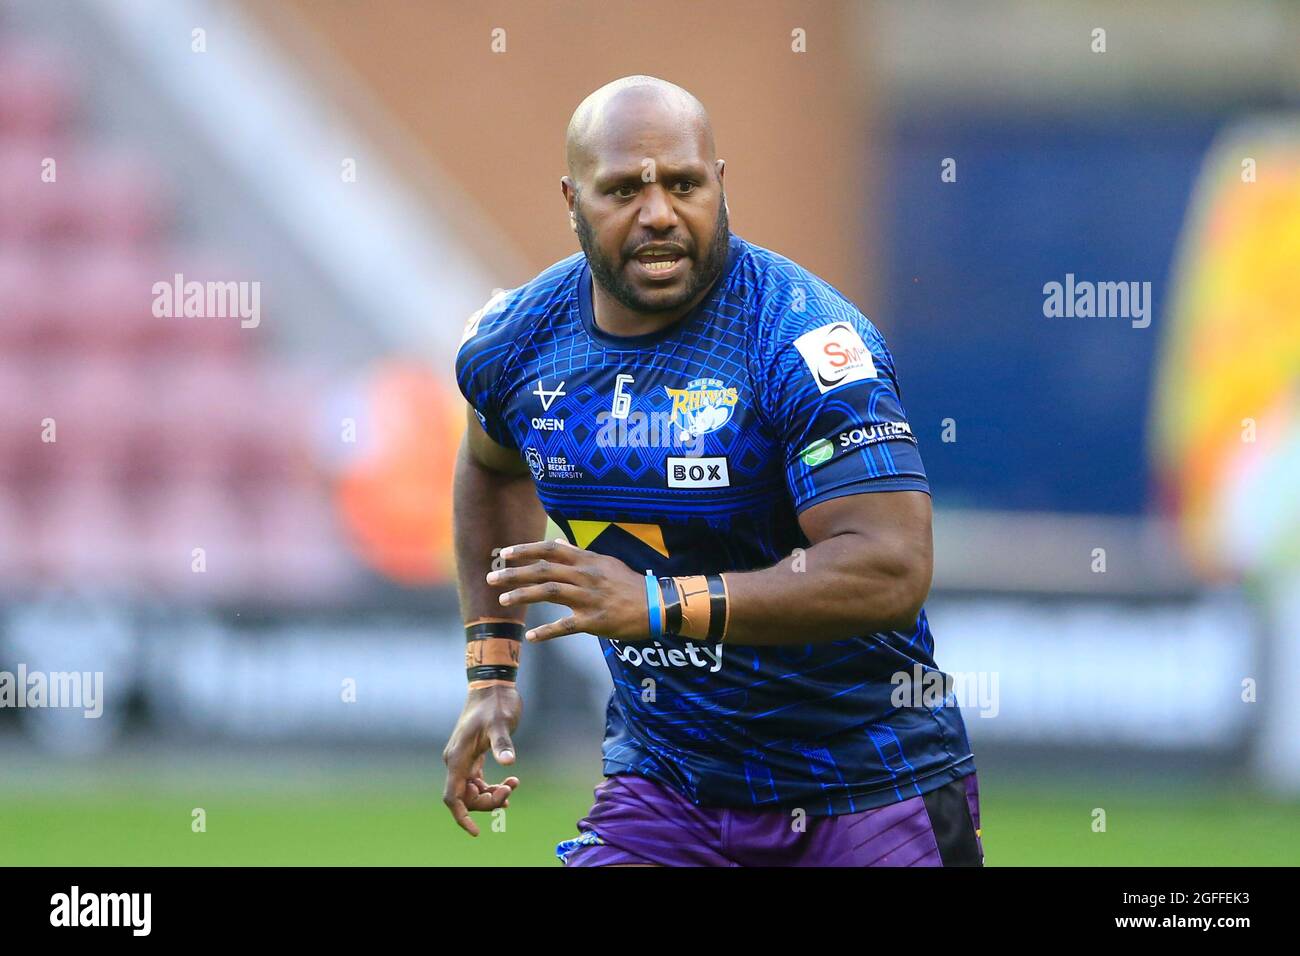 Wigan, UK. 25th Aug, 2021. Robert Lui (6) of Leeds Rhinos during the warm up for the game in Wigan, United Kingdom on 8/25/2021. (Photo by Conor Molloy/News Images/Sipa USA) Credit: Sipa USA/Alamy Live News Stock Photo